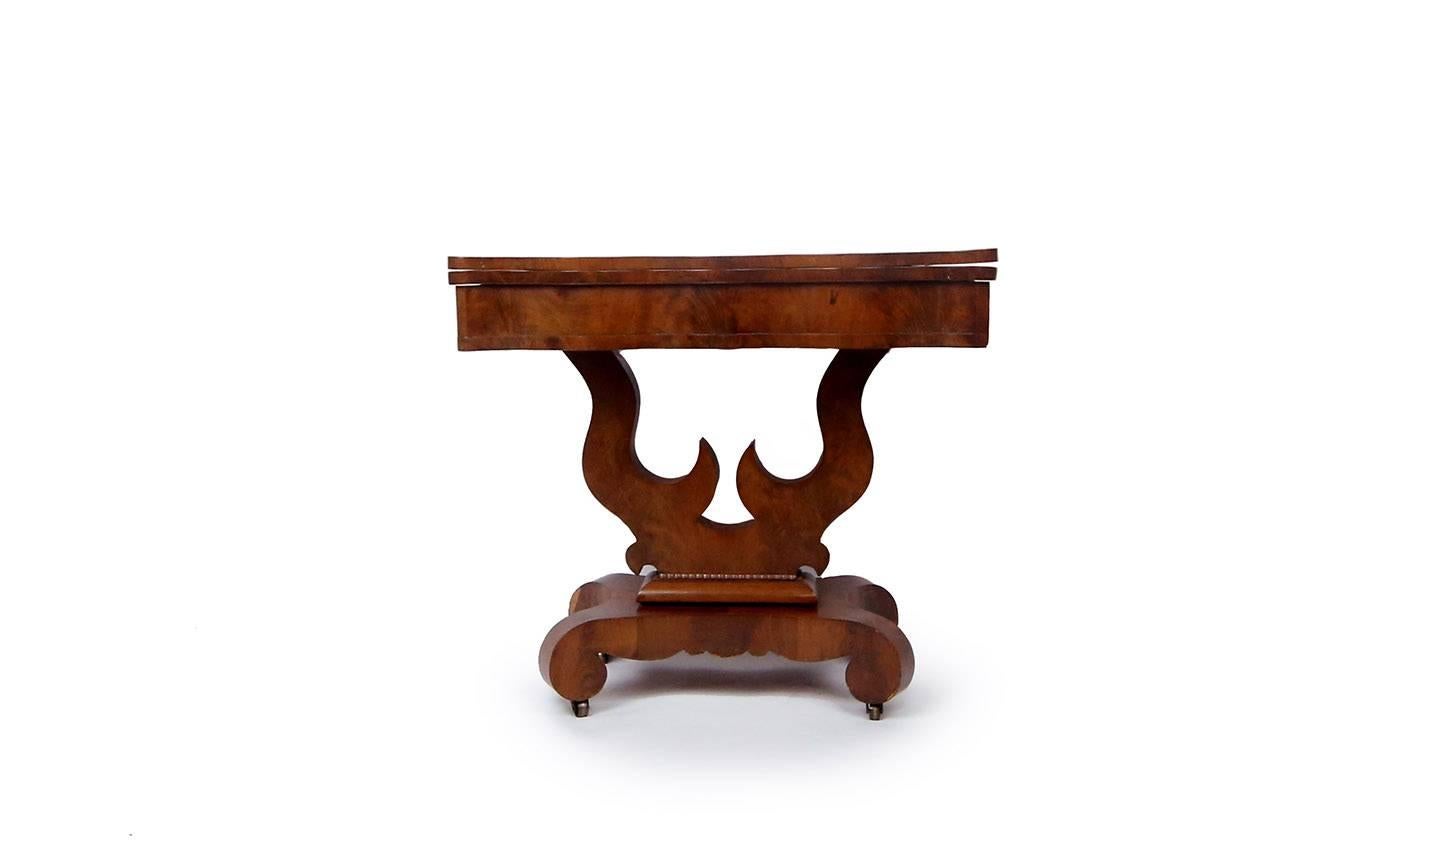 Handsome Empire card or tea table with centre pedestal in mahogany and matchbook flame mahogany. Hinged top opens to reveal compartment and pivots to become square table. Scalloped edge top and frieze supported by bold harp base and scroll legs with